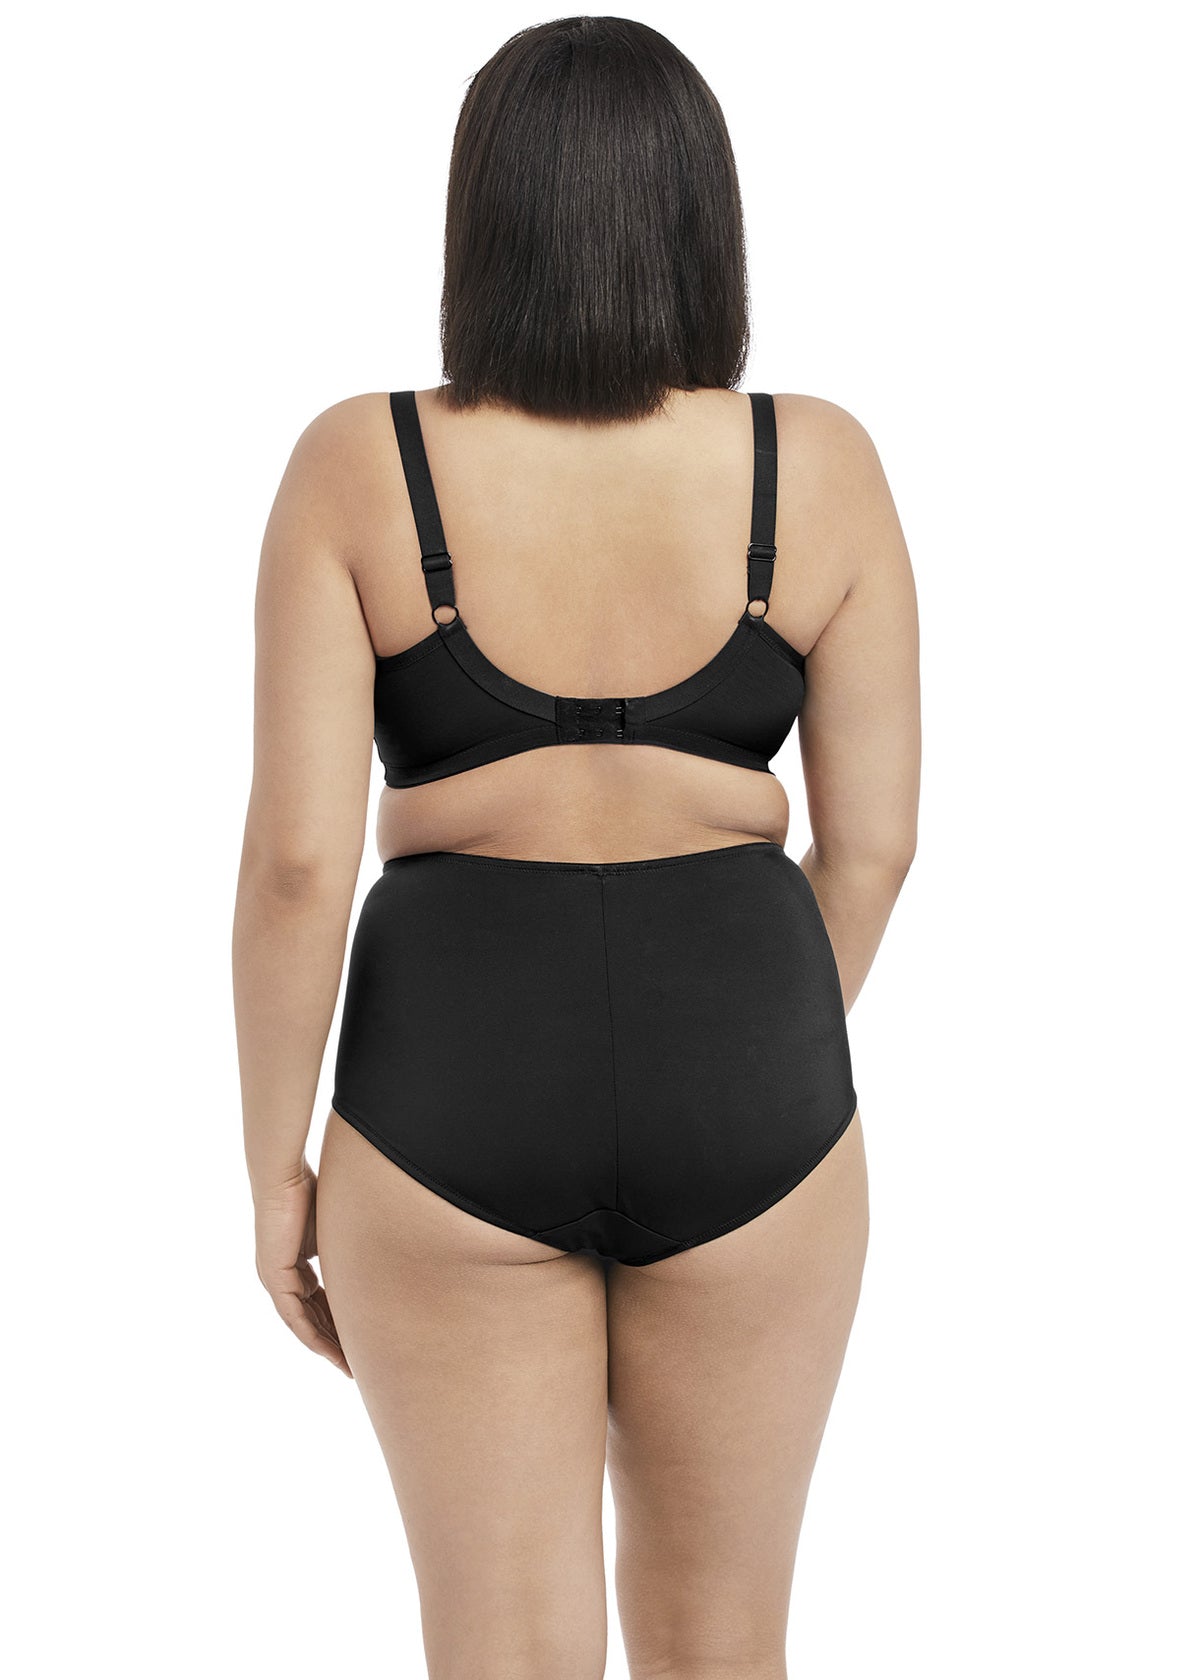 Plus size strappy lingerie NYC